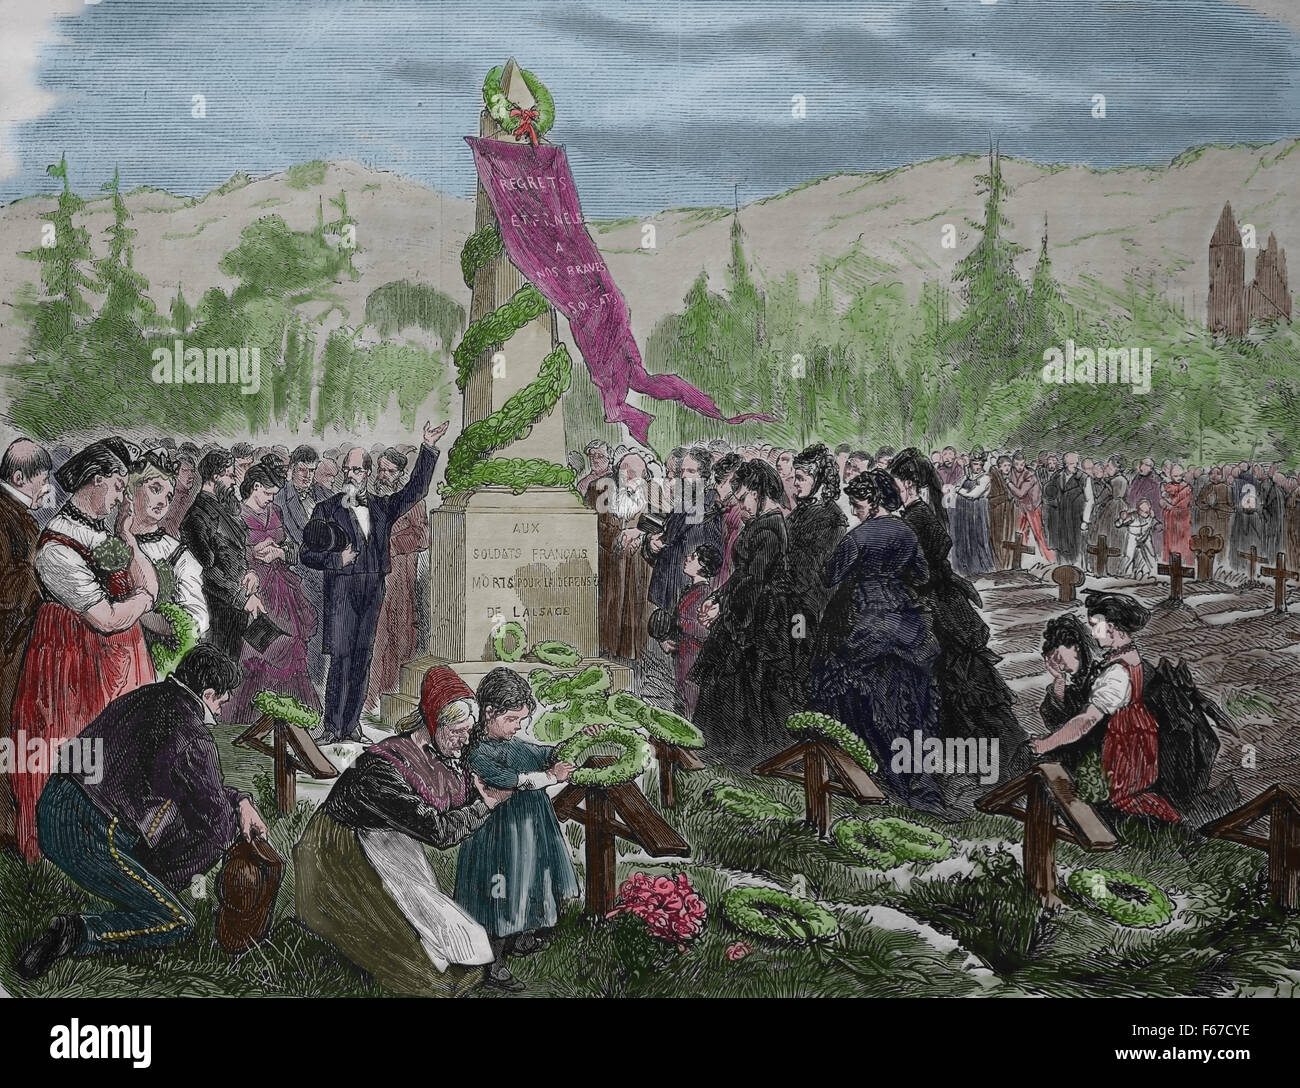 Anniversary. Inaguration of a memorial to the fallen in Alsace (Franco-Prussian Warr, 1870 . German annexion of Alsace-Lorraine) Stock Photo